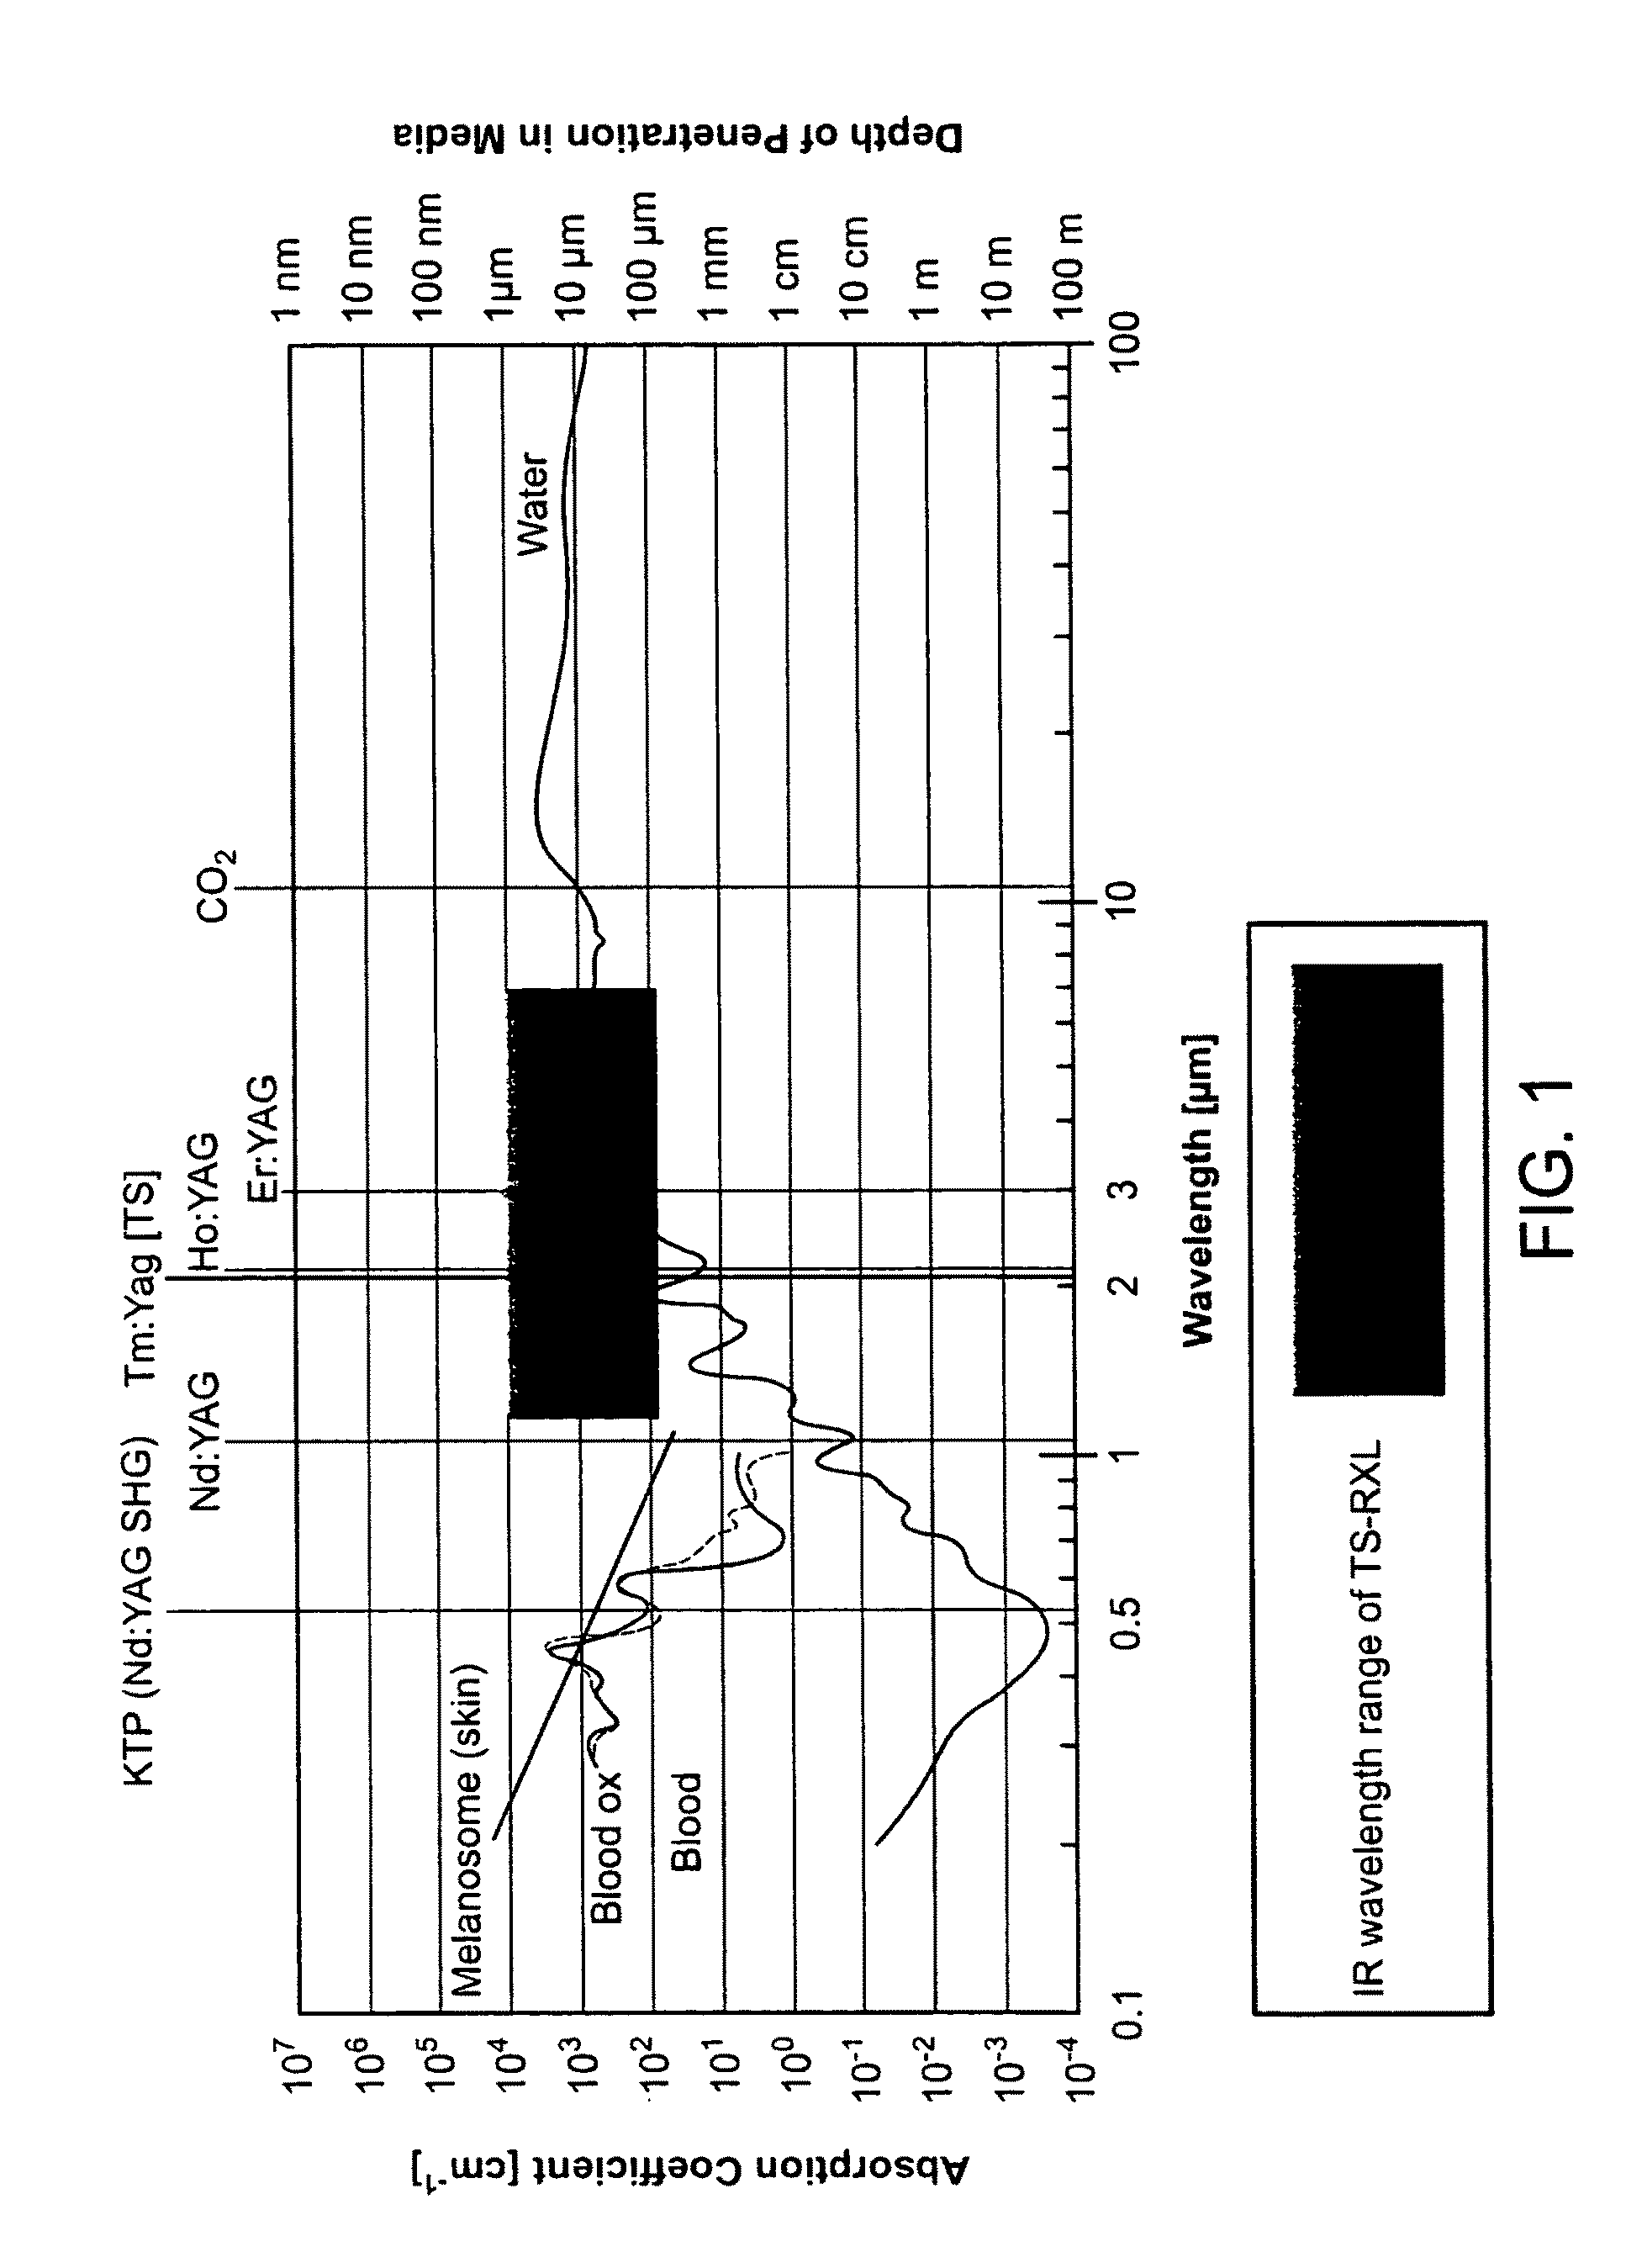 Method and apparatus for treatment of ocular tissue using combine modalities